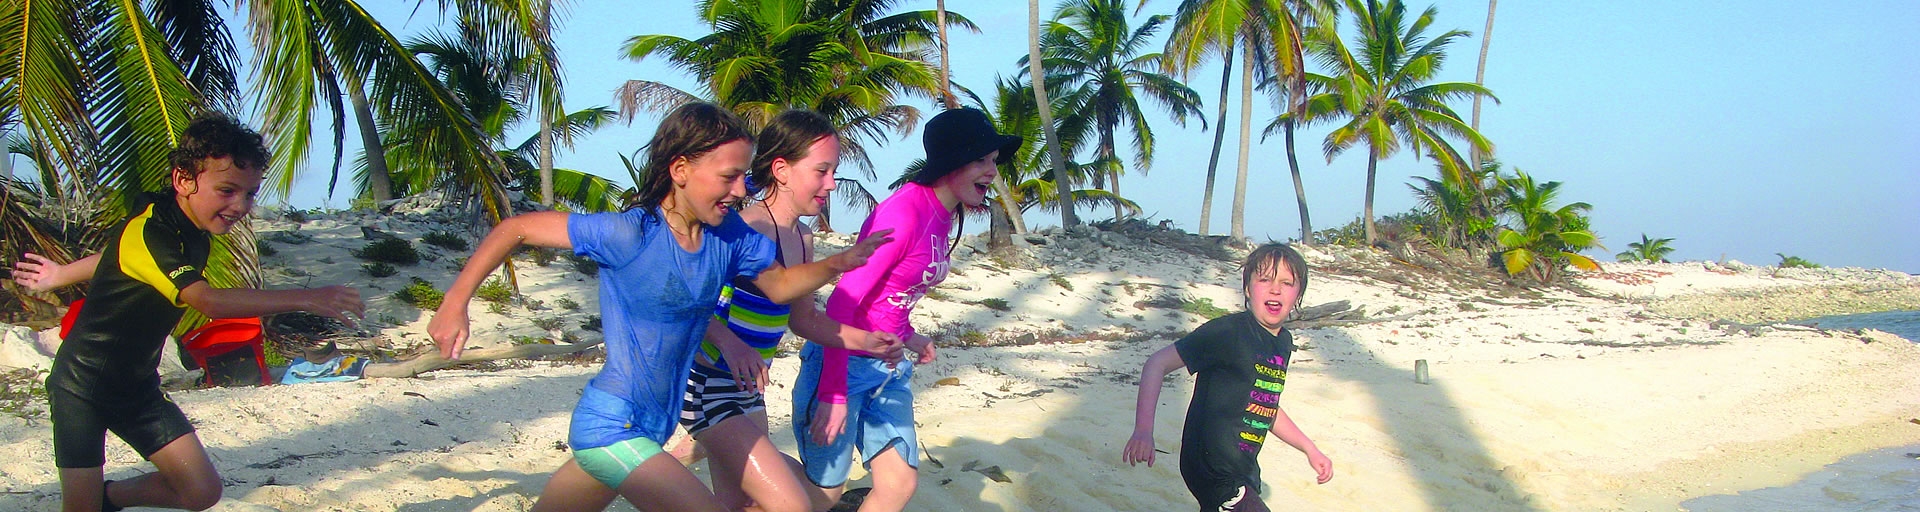 kids running on the beach in belize